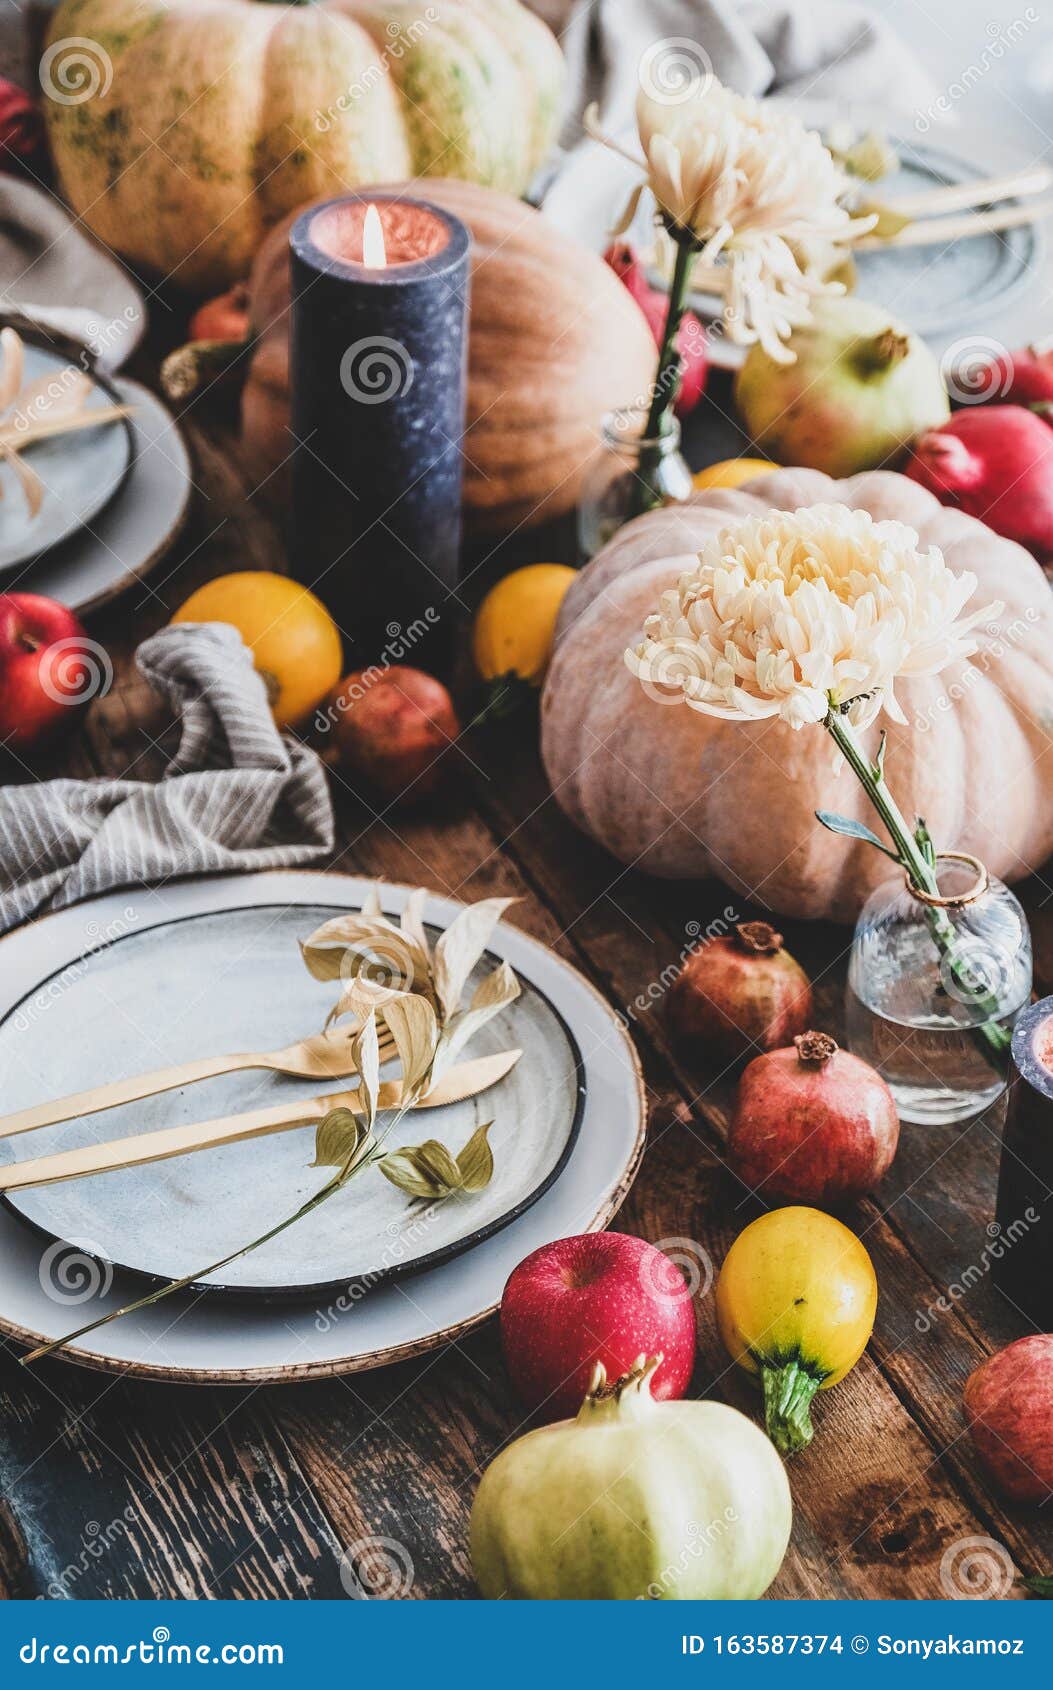 Fall Table Setting for Thanksgiving Day Family Dinner Stock Photo ...